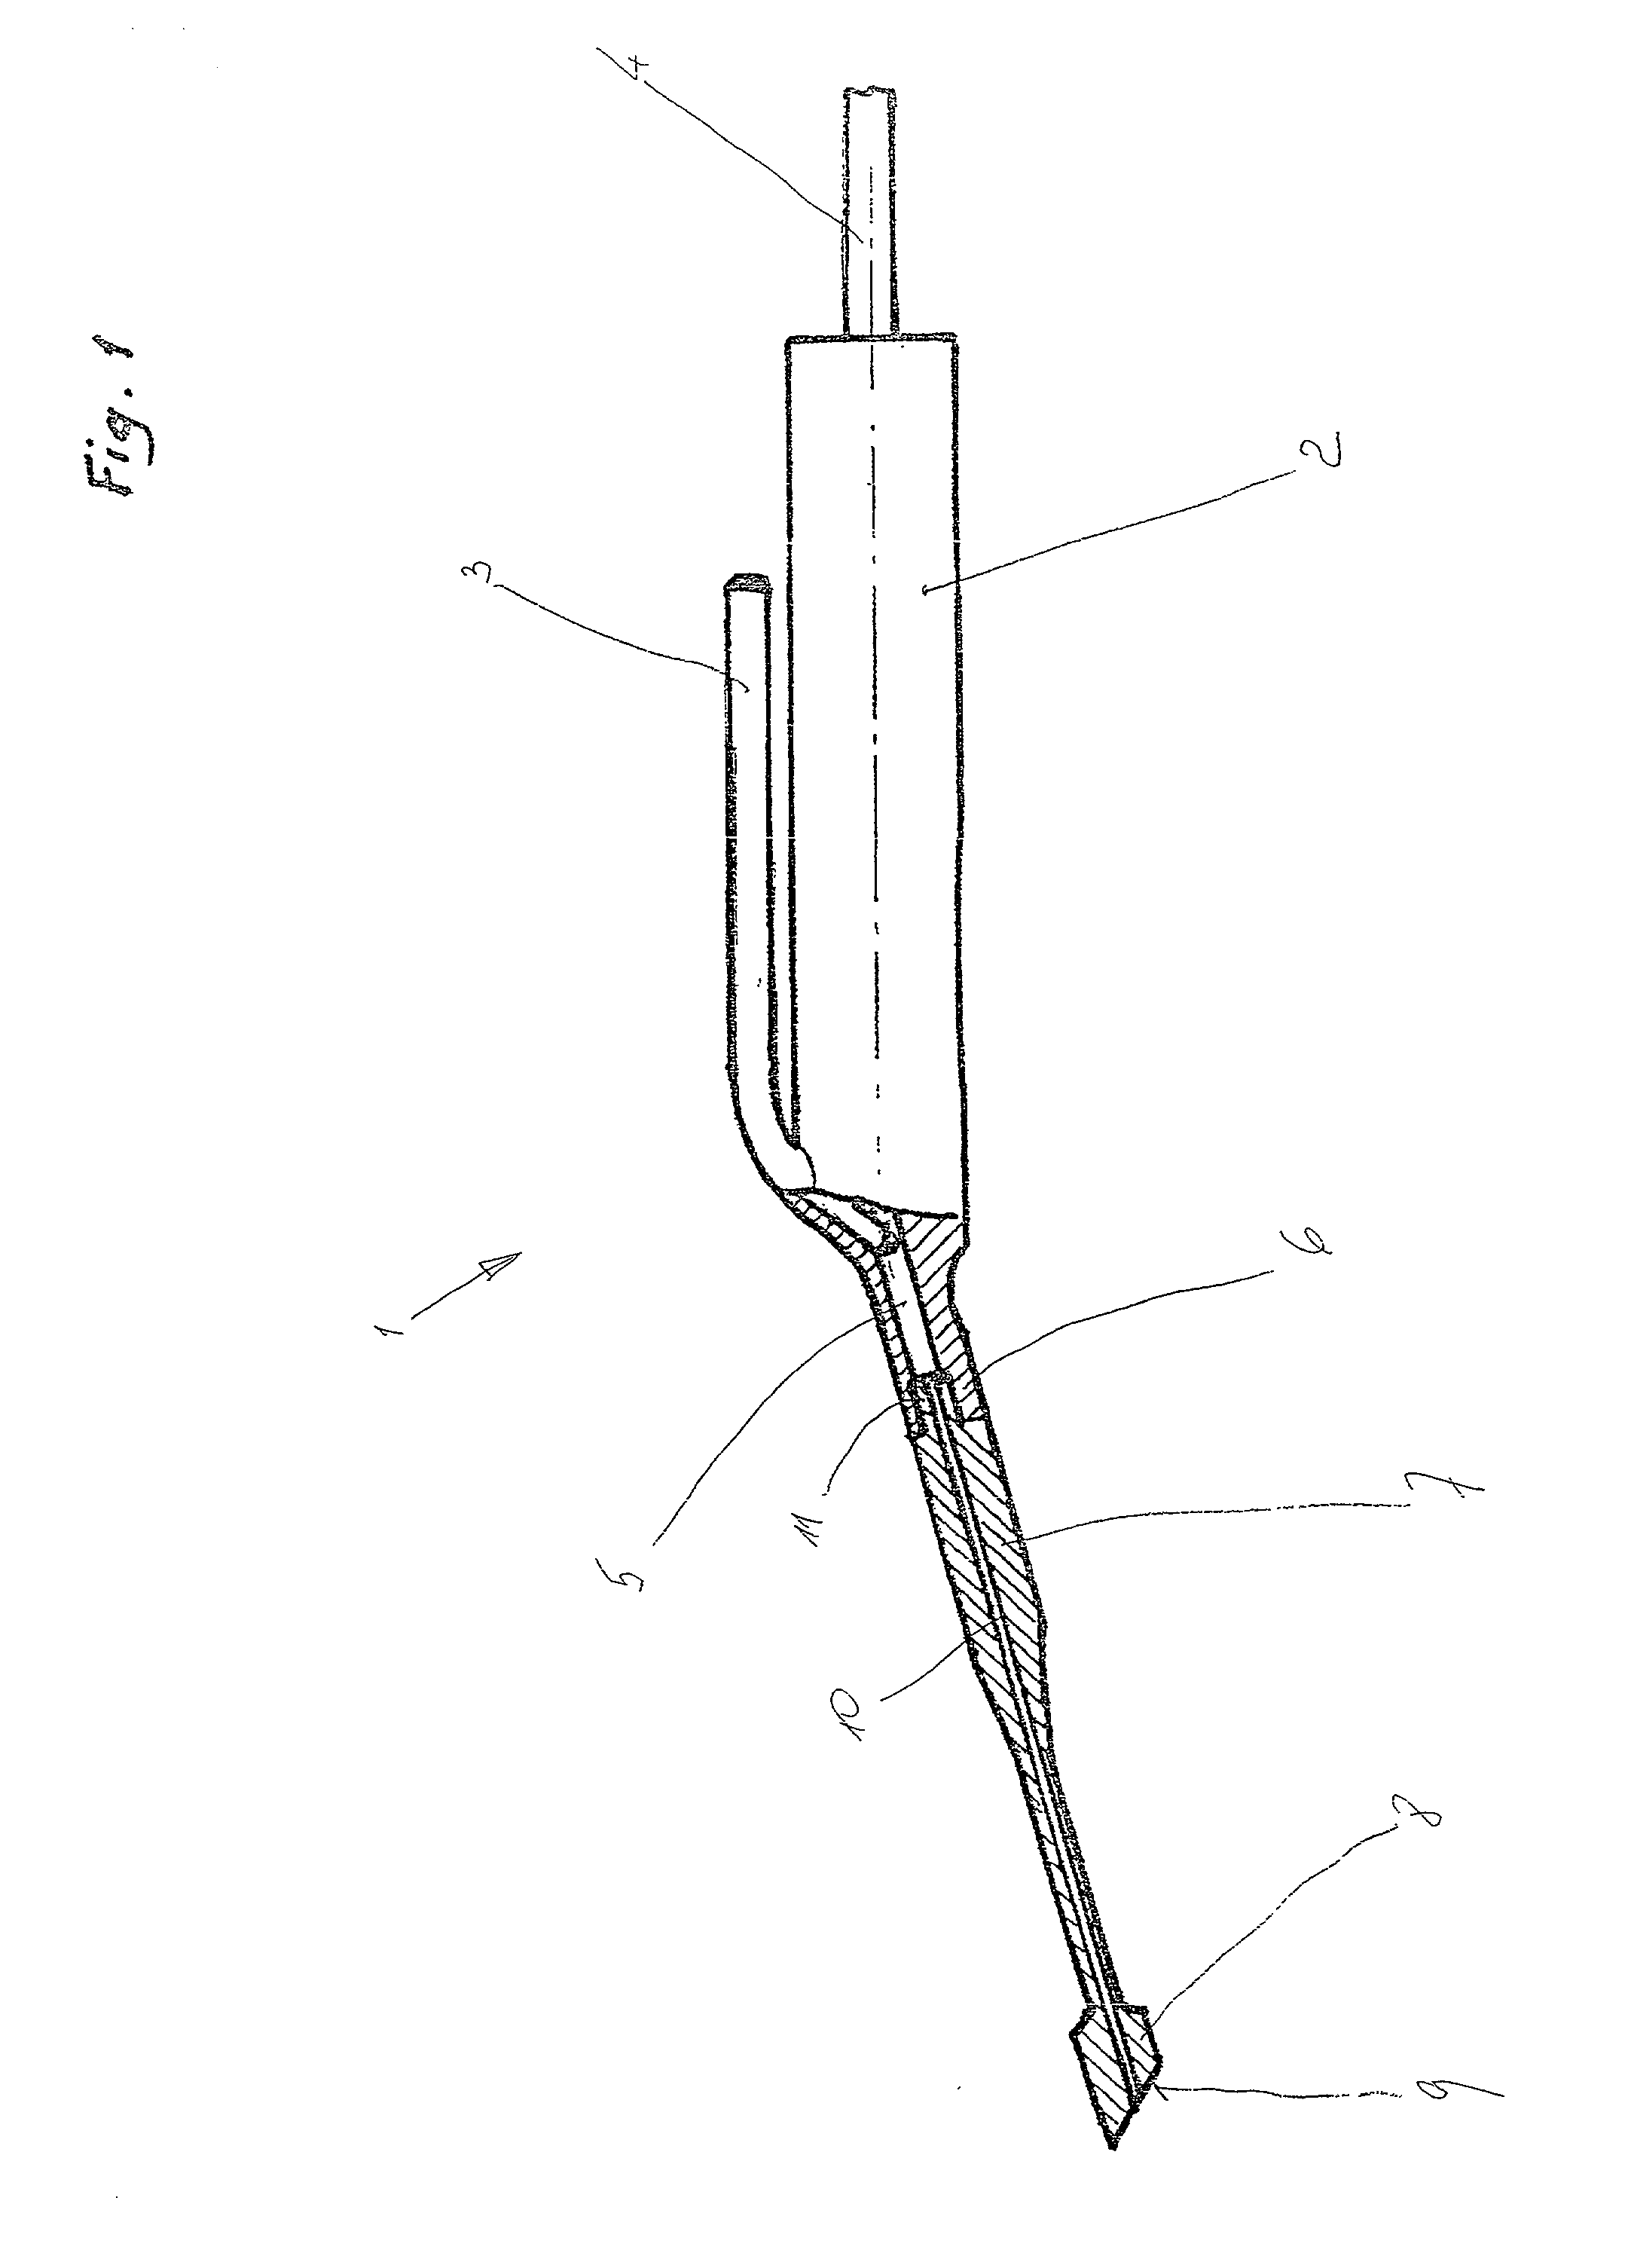 Ultrasonic apparatus for the treatment of septic wounds